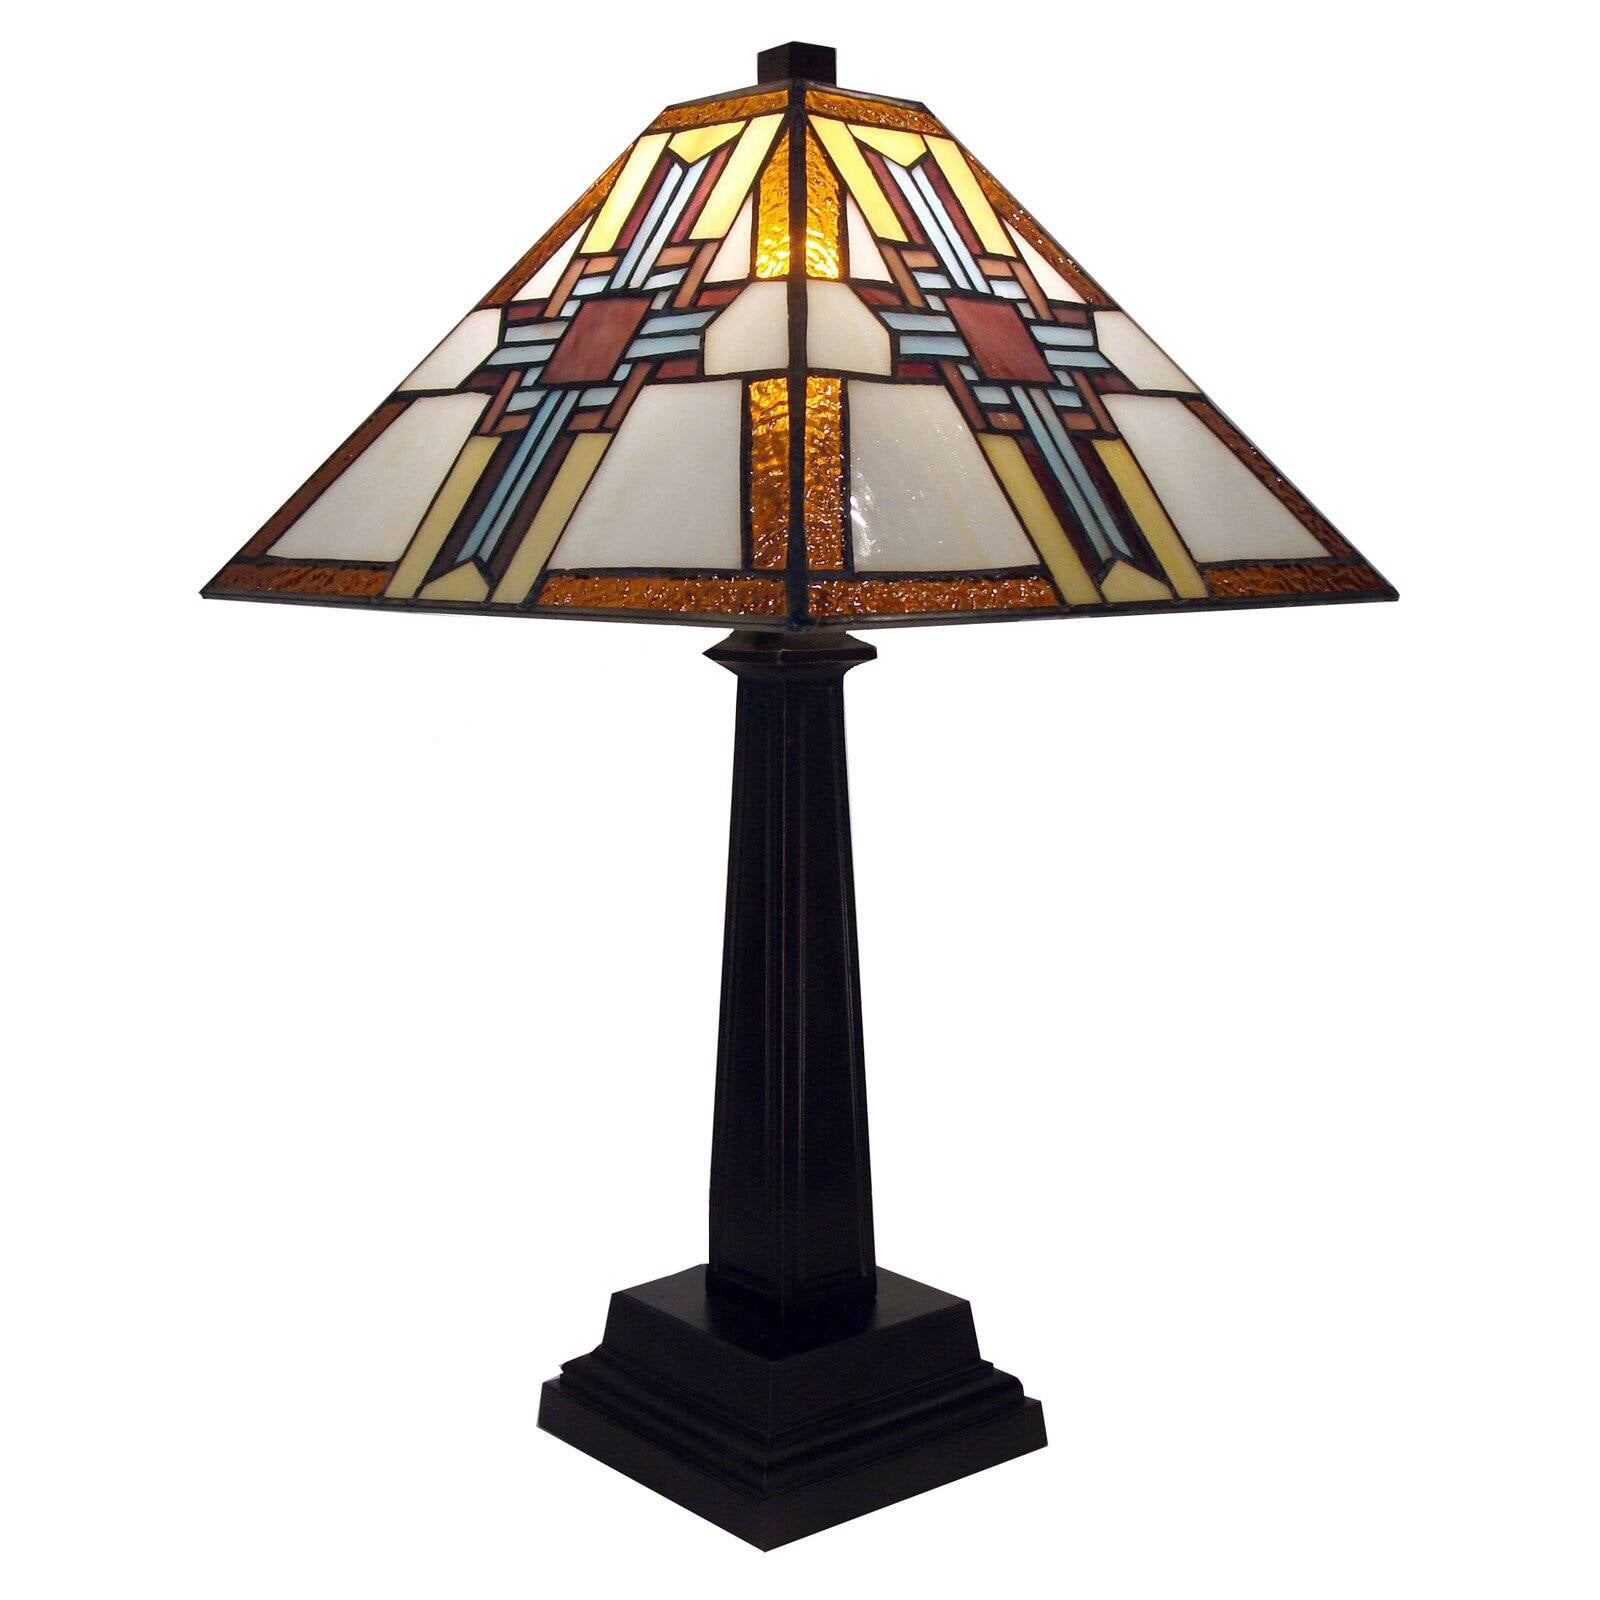 Bankers Lamp, Library Lamp, Tiffany Lamp, Stained Glass Lamp, Table Lamp,  Office Decor, Table Decor, Desk Lamp, Art Deco Lamp, Tiffany -  Canada